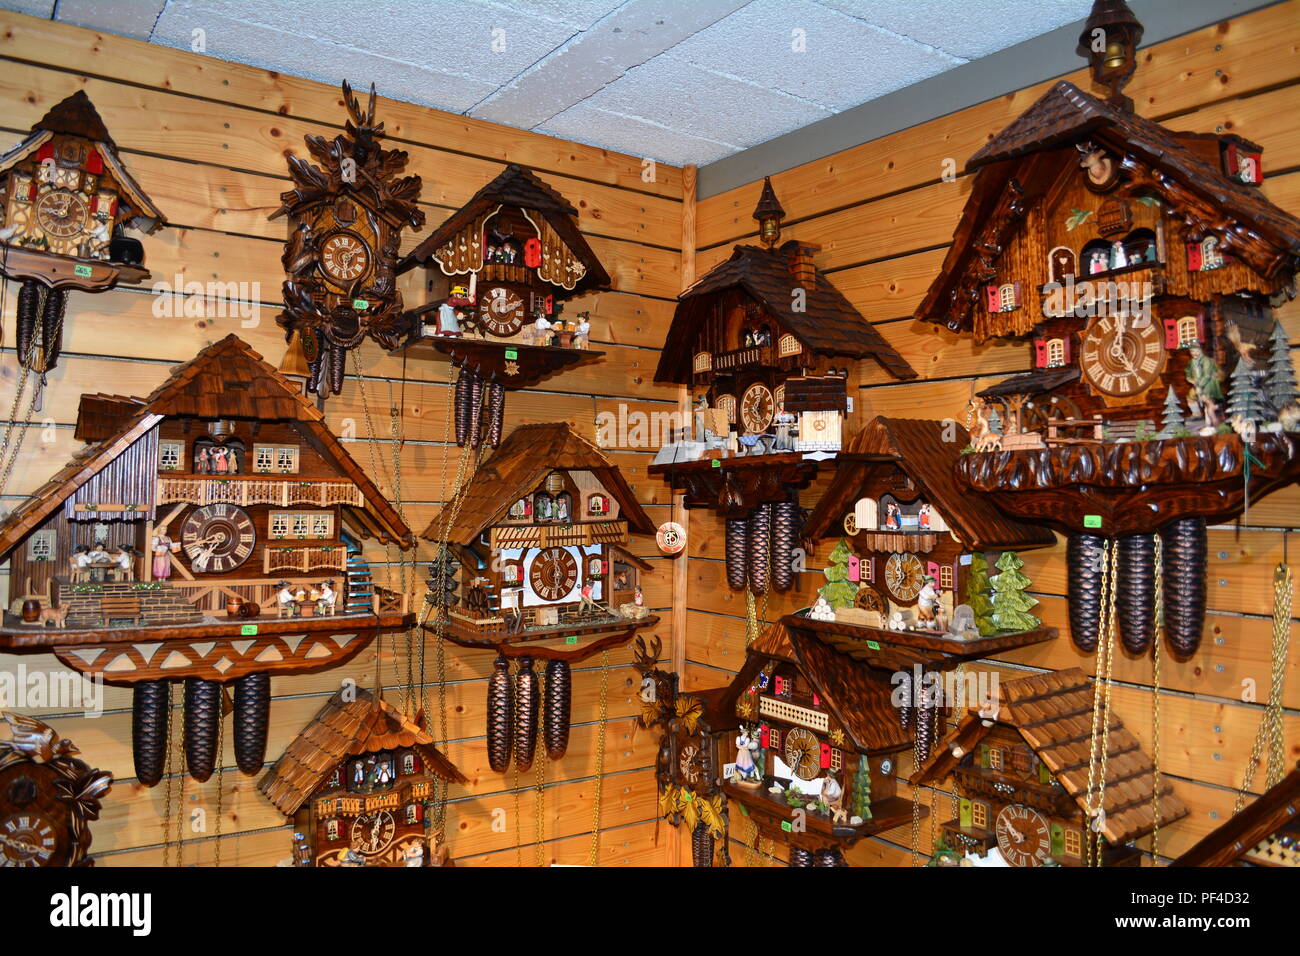 Cuckoo Clocks Black Forest Germany High Resolution Stock Photography And Images Alamy